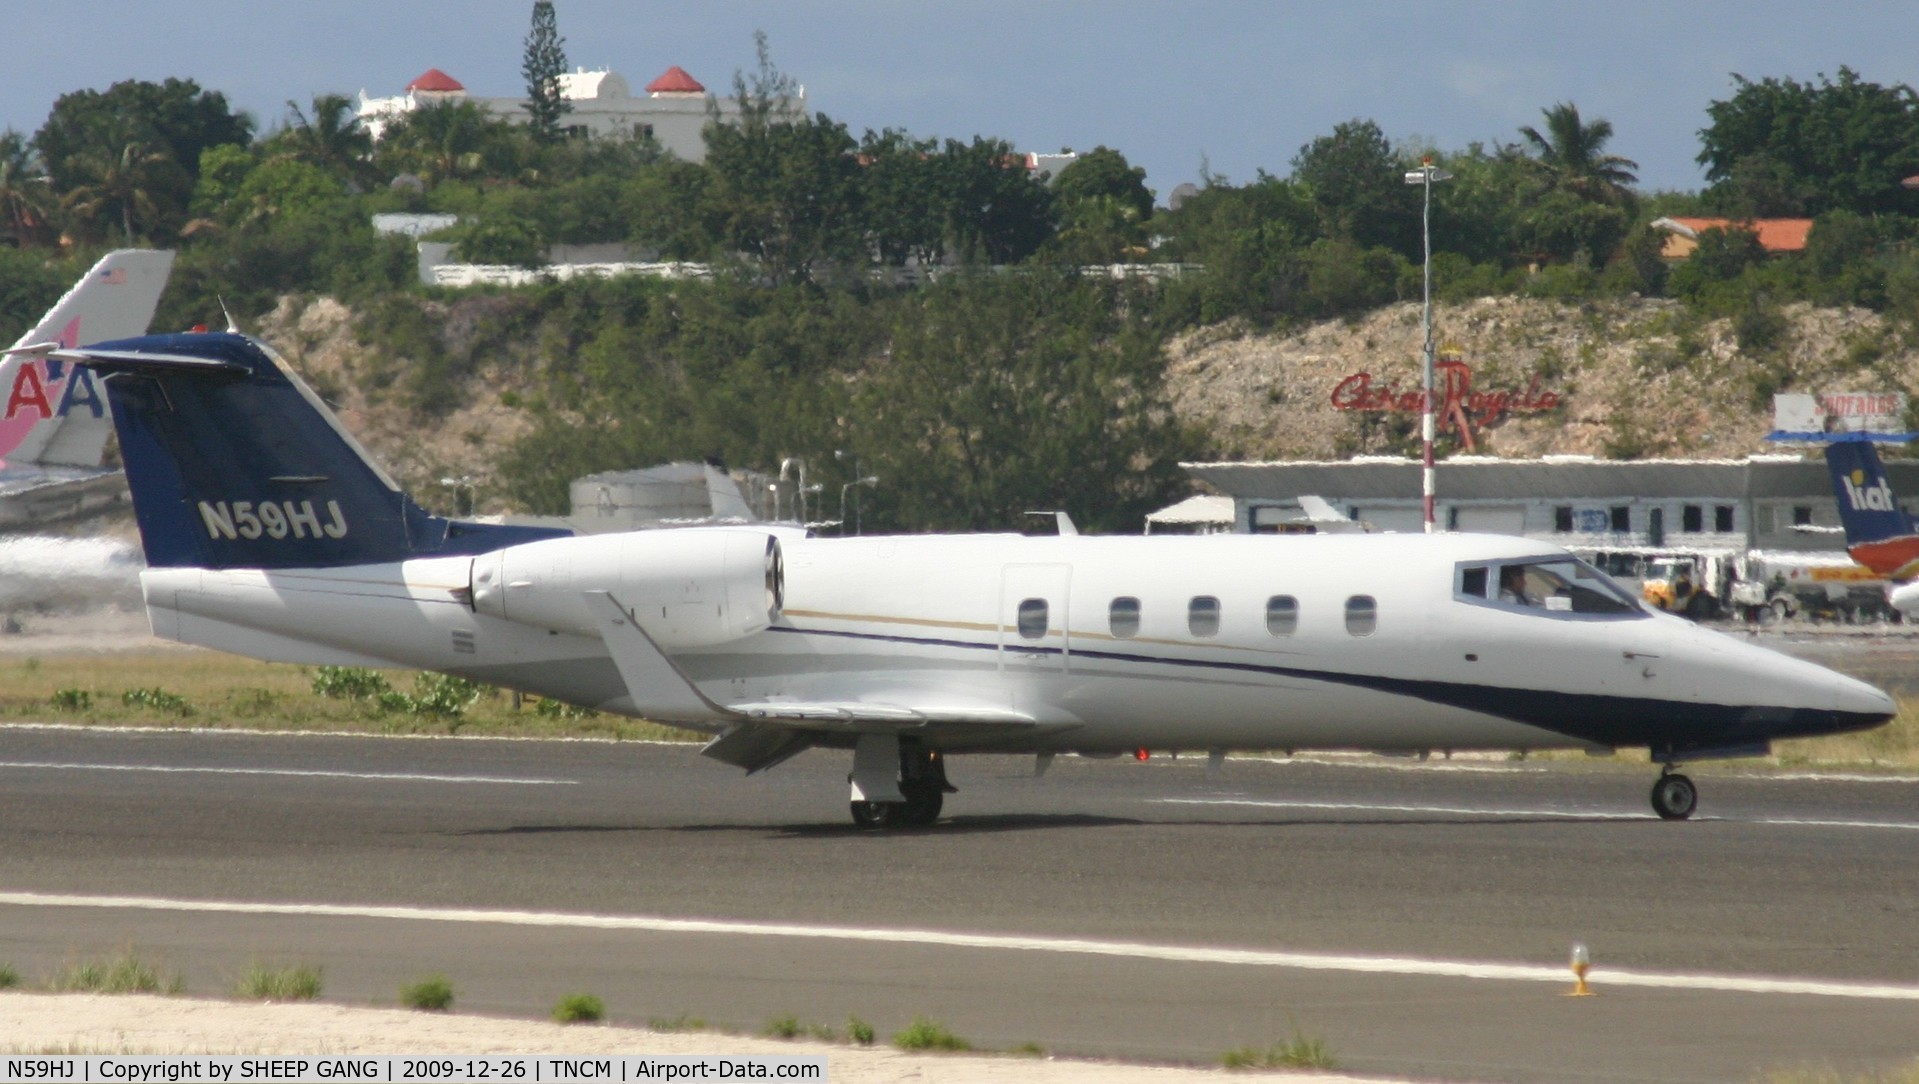 N59HJ, 1982 Gates Learjet 55 Longhorn C/N 027, N59HJ just landed and now back tracking on the runway